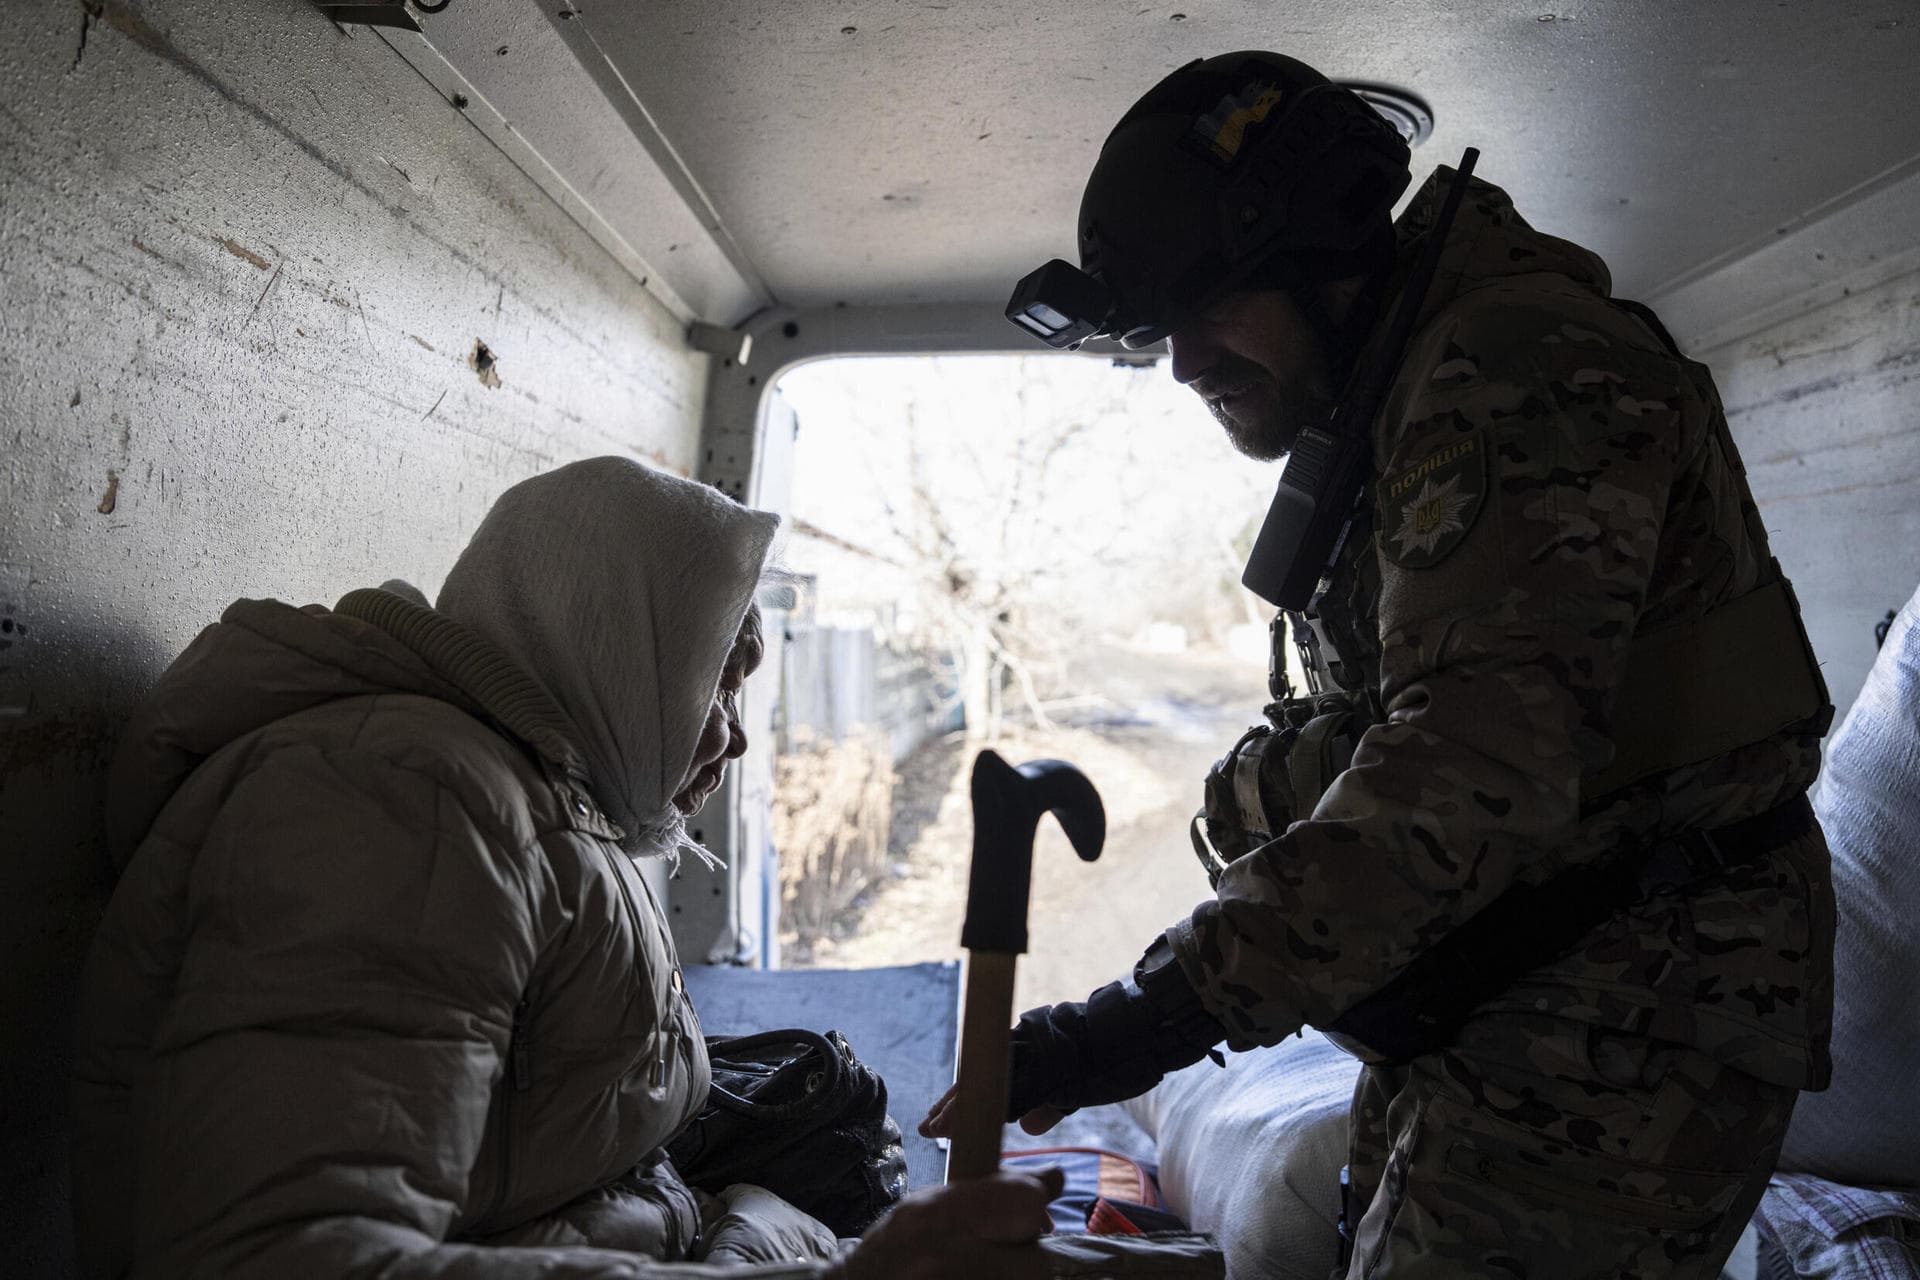 A Ukrainian police officer helps en elderly woman as she evacuates to safe areas in Chasiv Yar